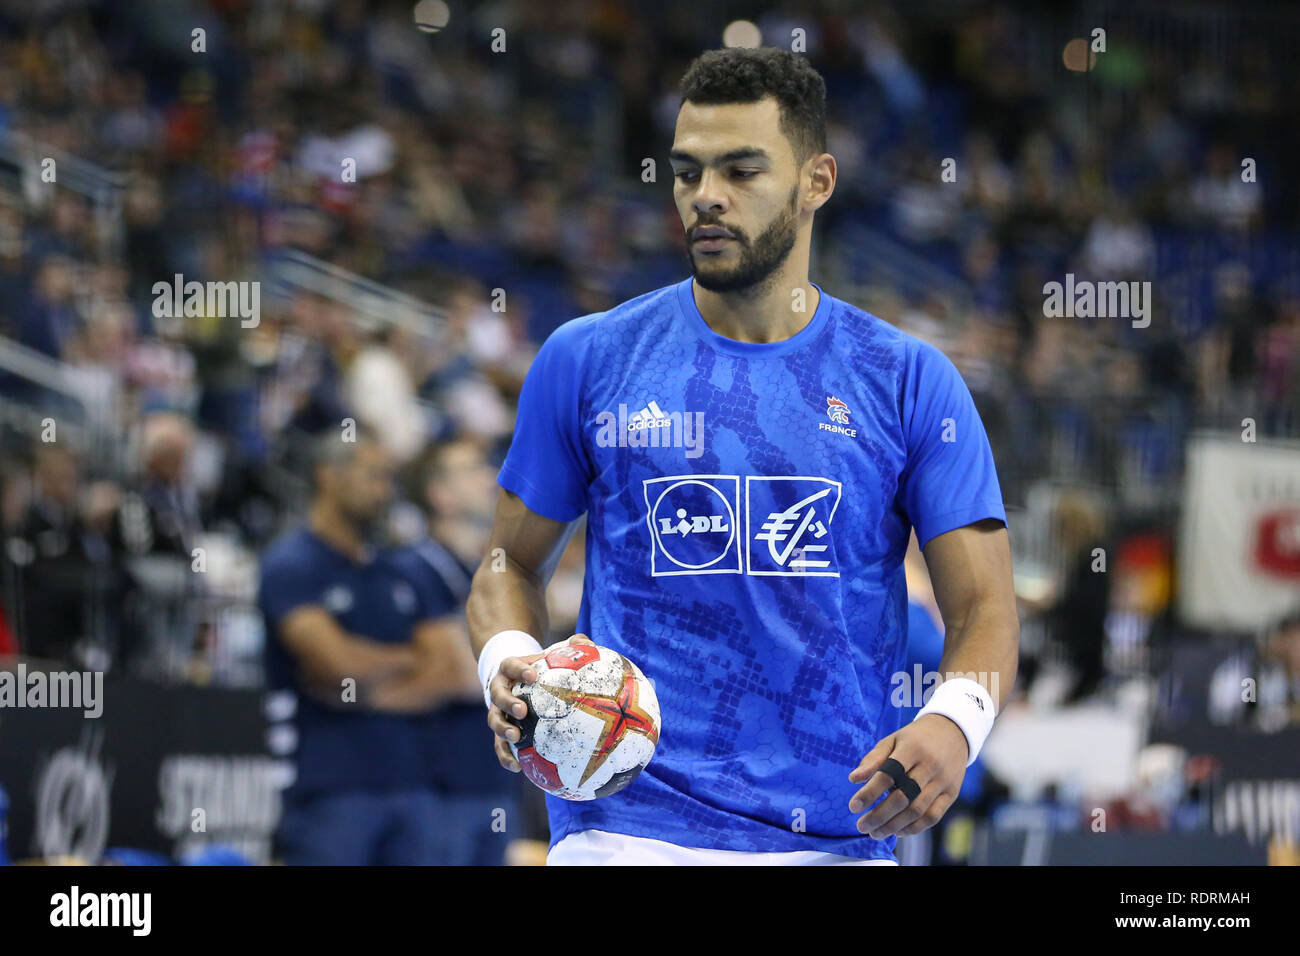 Germany. Berlin, Germany. 17th Jan 2019. IHF Handball Men's World Championship, Berlin, Germany.Adrien Dipanda for France during the warm-up before the game Credit: Mickael Chavet/Alamy Live News Stock Photo